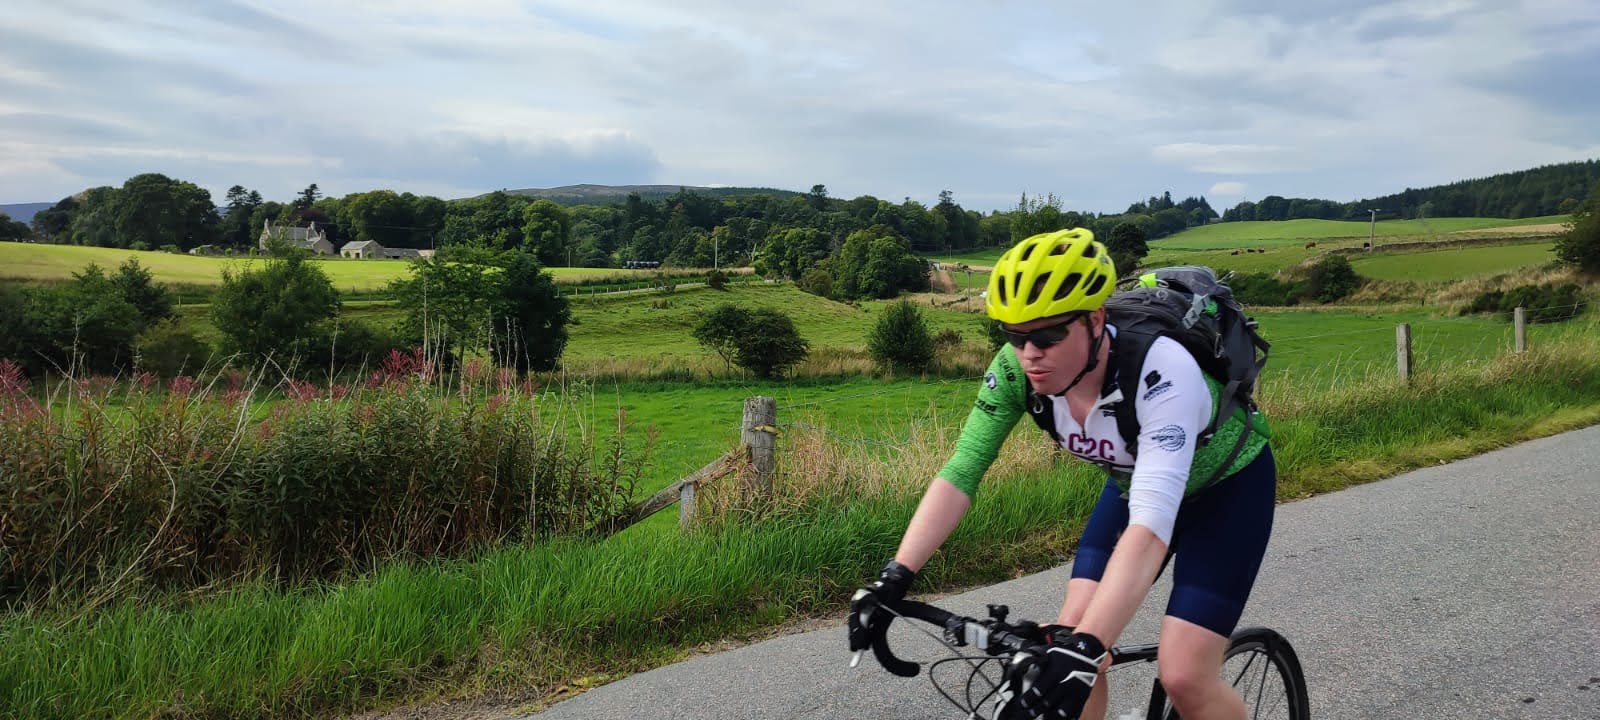 MEMBER NEWS: bp employee to cycle over 200 miles to raise funds for Myeloma UK after the charity’s clinical trial improved his father’s quality of life